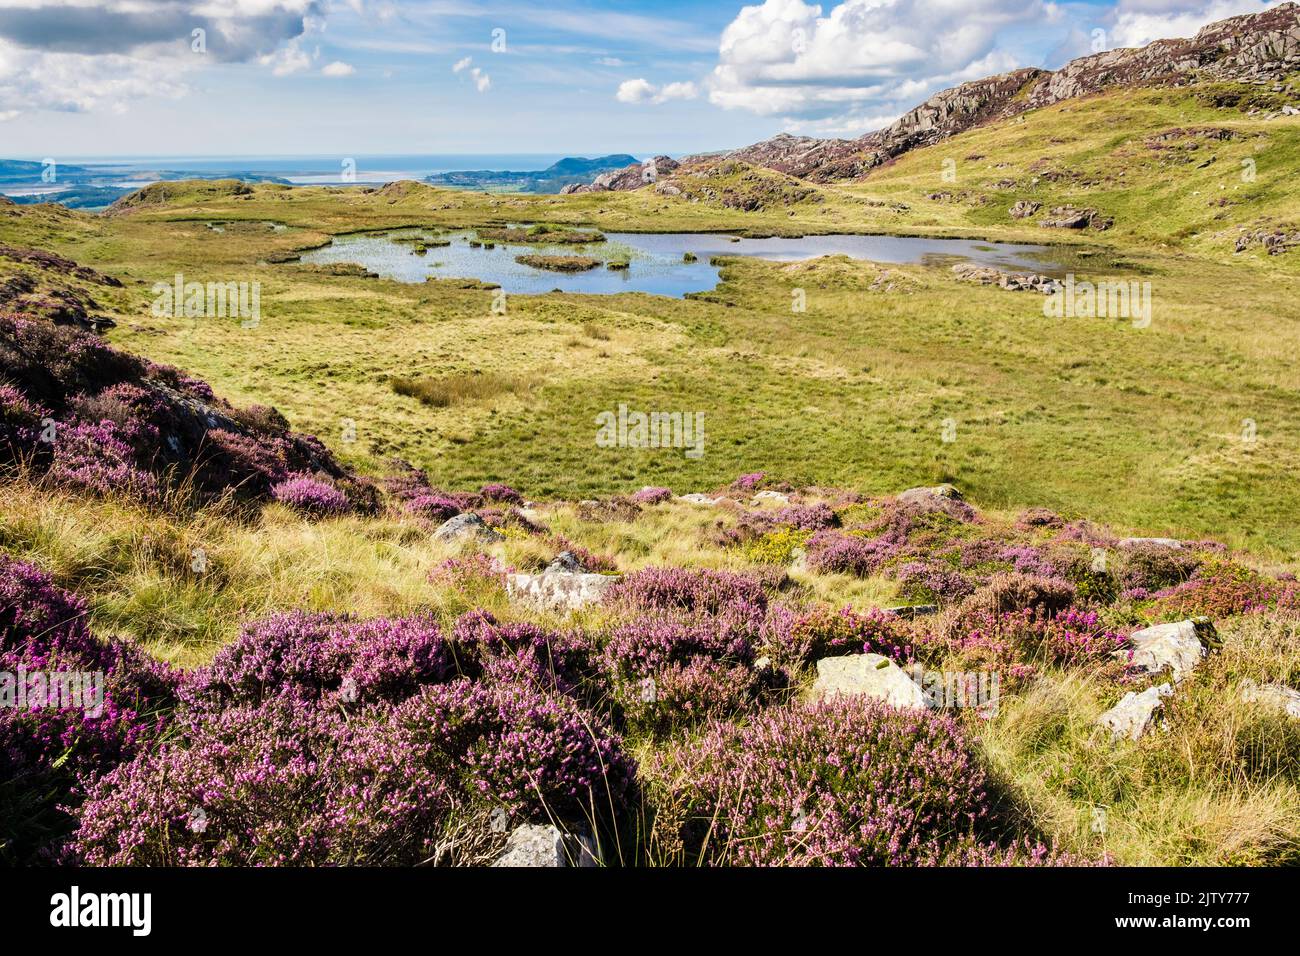 View to the coast across small lake on lower slopes of Cnicht in Snowdonia National Park in summer. Beddgelert, Gwynedd, north Wales, UK, Britain Stock Photo